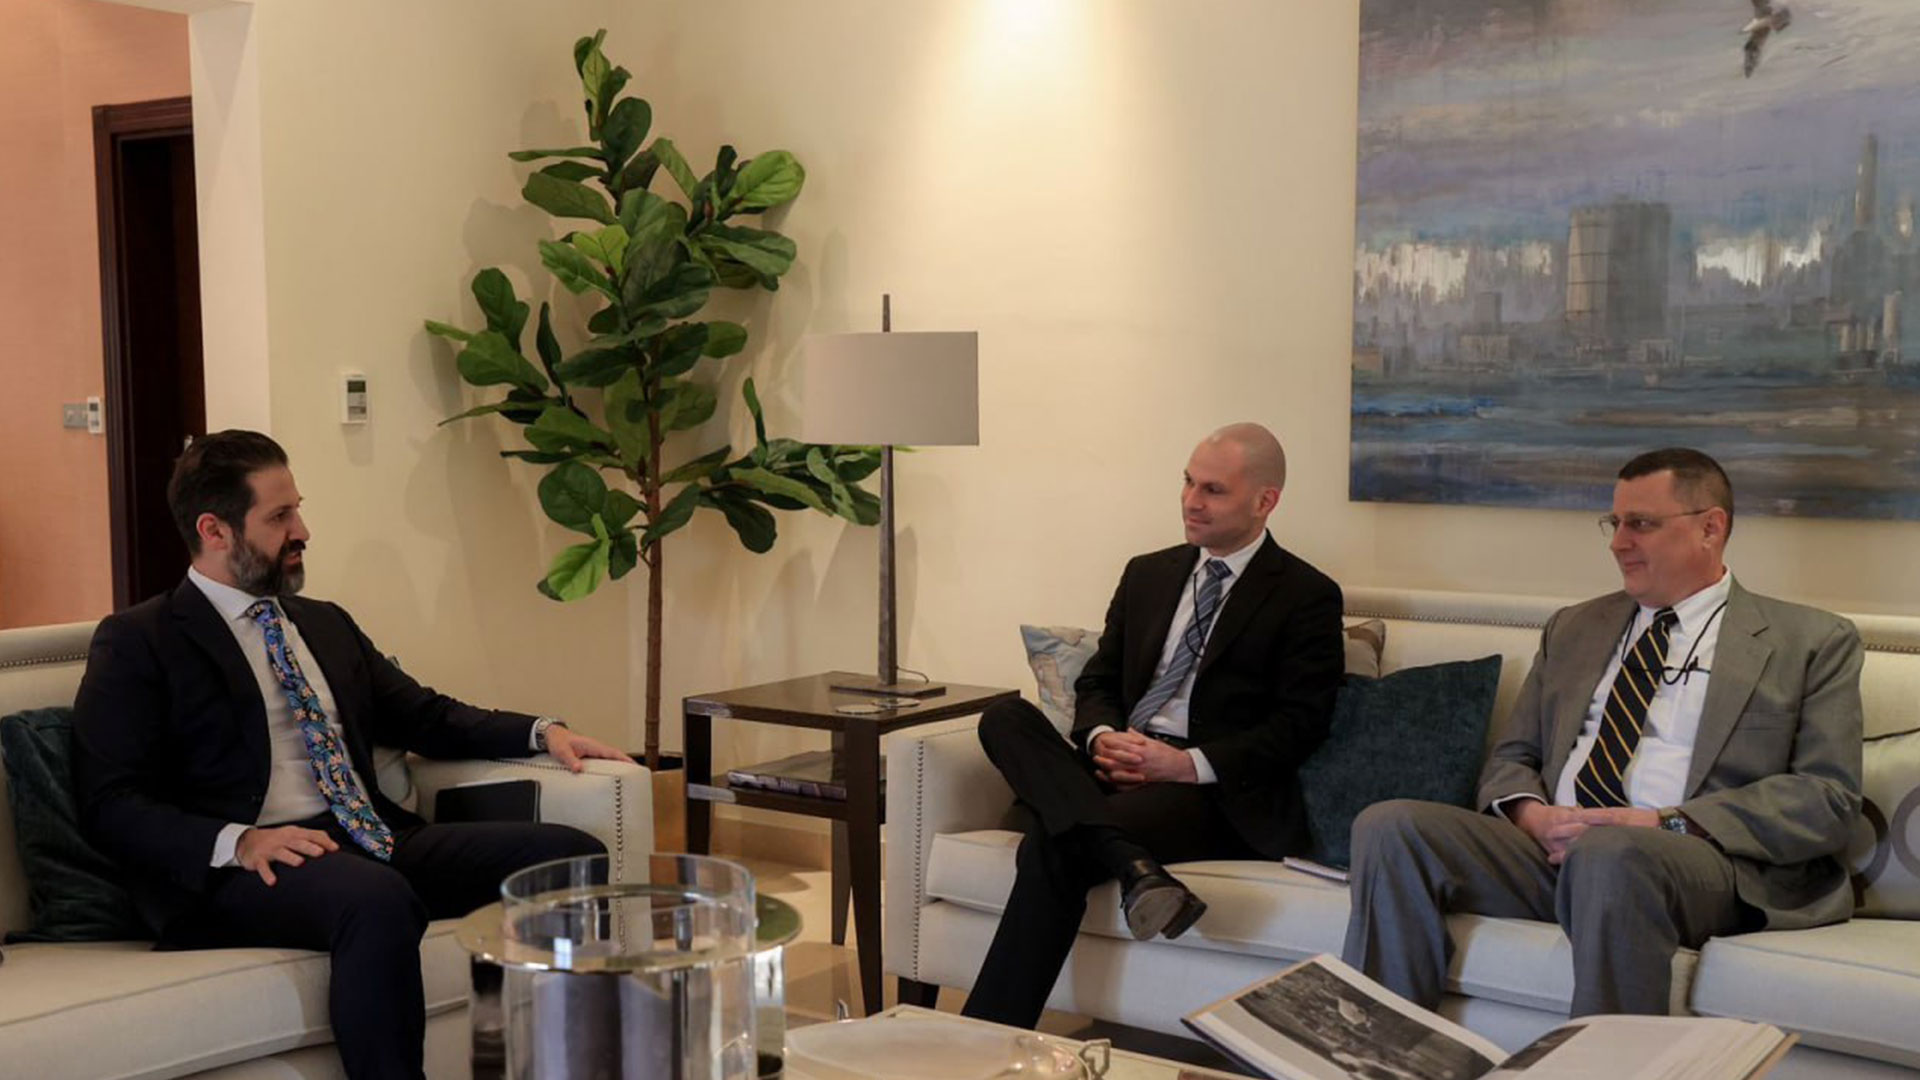 Qubad Talabani meets with a Senate delegation from the U.S. in Erbil